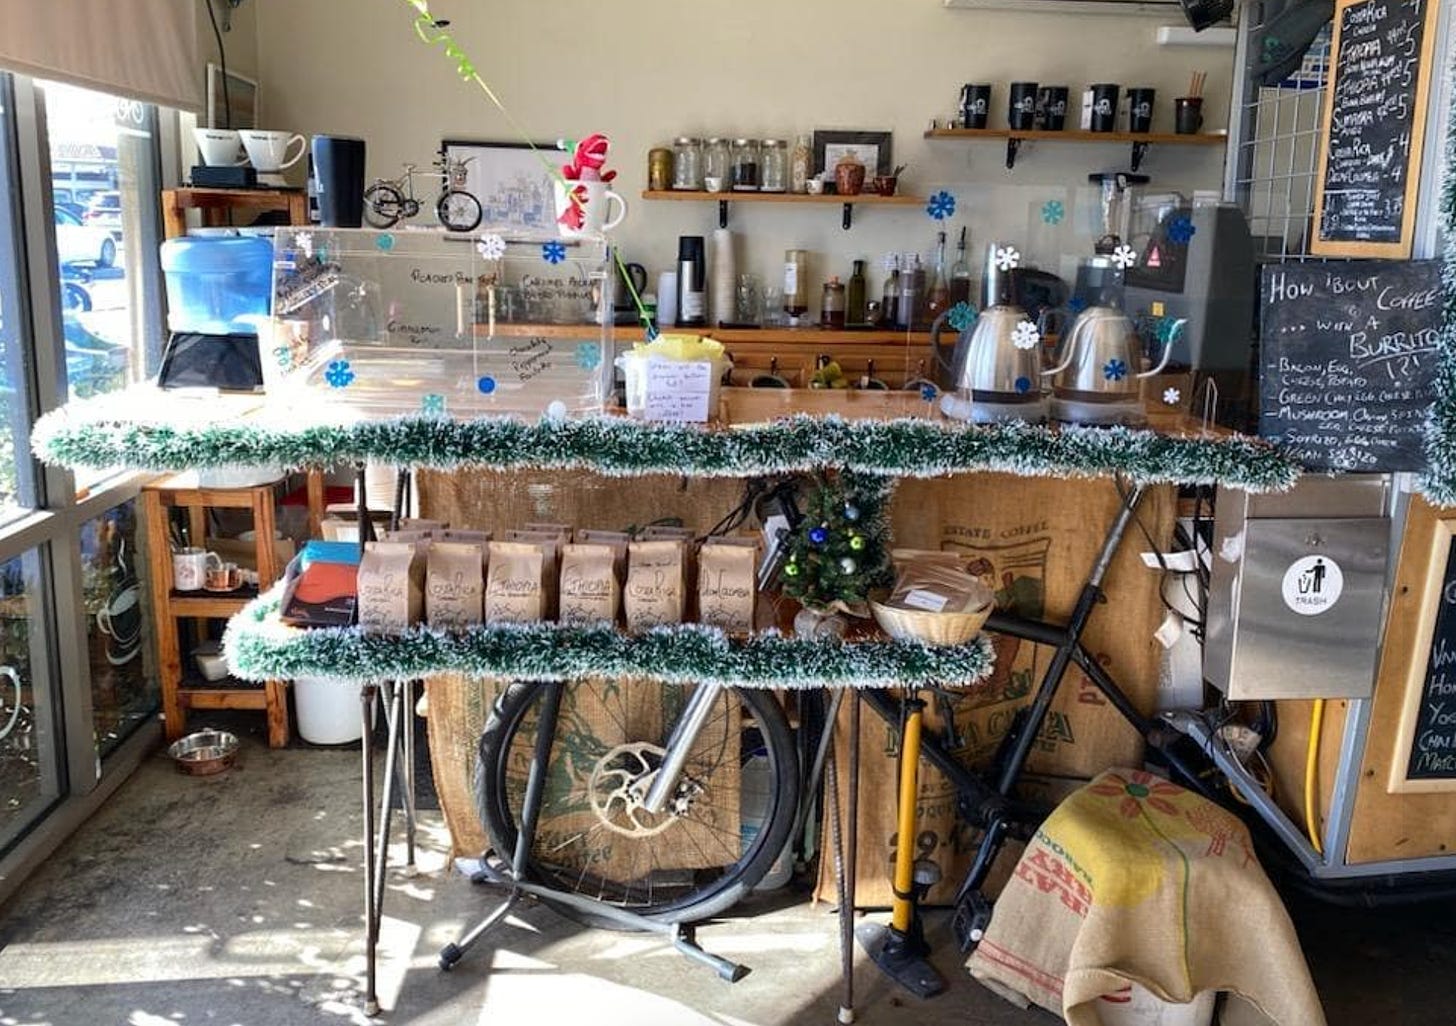 The inside of Coffee Cycle. The coffee cart is covered with green frosted holiday tinsel with bags of fresh coffee beans on a shelf below the counter.